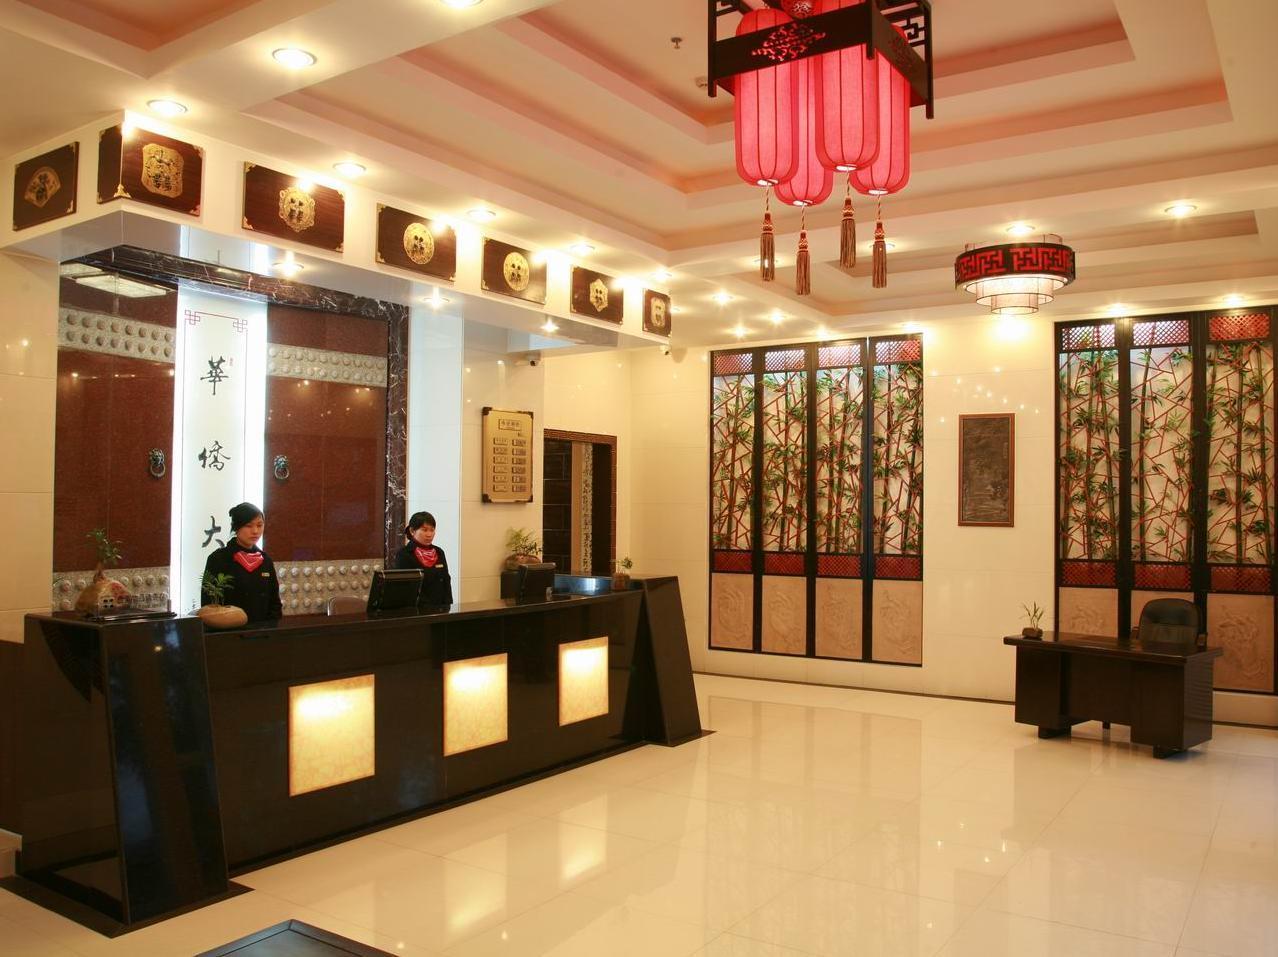 Guilin Overseas Chinese Mansion Guilin FAQ 2016, What facilities are there in Guilin Overseas Chinese Mansion Guilin 2016, What Languages Spoken are Supported in Guilin Overseas Chinese Mansion Guilin 2016, Which payment cards are accepted in Guilin Overseas Chinese Mansion Guilin , Guilin Guilin Overseas Chinese Mansion room facilities and services Q&A 2016, Guilin Guilin Overseas Chinese Mansion online booking services 2016, Guilin Guilin Overseas Chinese Mansion address 2016, Guilin Guilin Overseas Chinese Mansion telephone number 2016,Guilin Guilin Overseas Chinese Mansion map 2016, Guilin Guilin Overseas Chinese Mansion traffic guide 2016, how to go Guilin Guilin Overseas Chinese Mansion, Guilin Guilin Overseas Chinese Mansion booking online 2016, Guilin Guilin Overseas Chinese Mansion room types 2016.